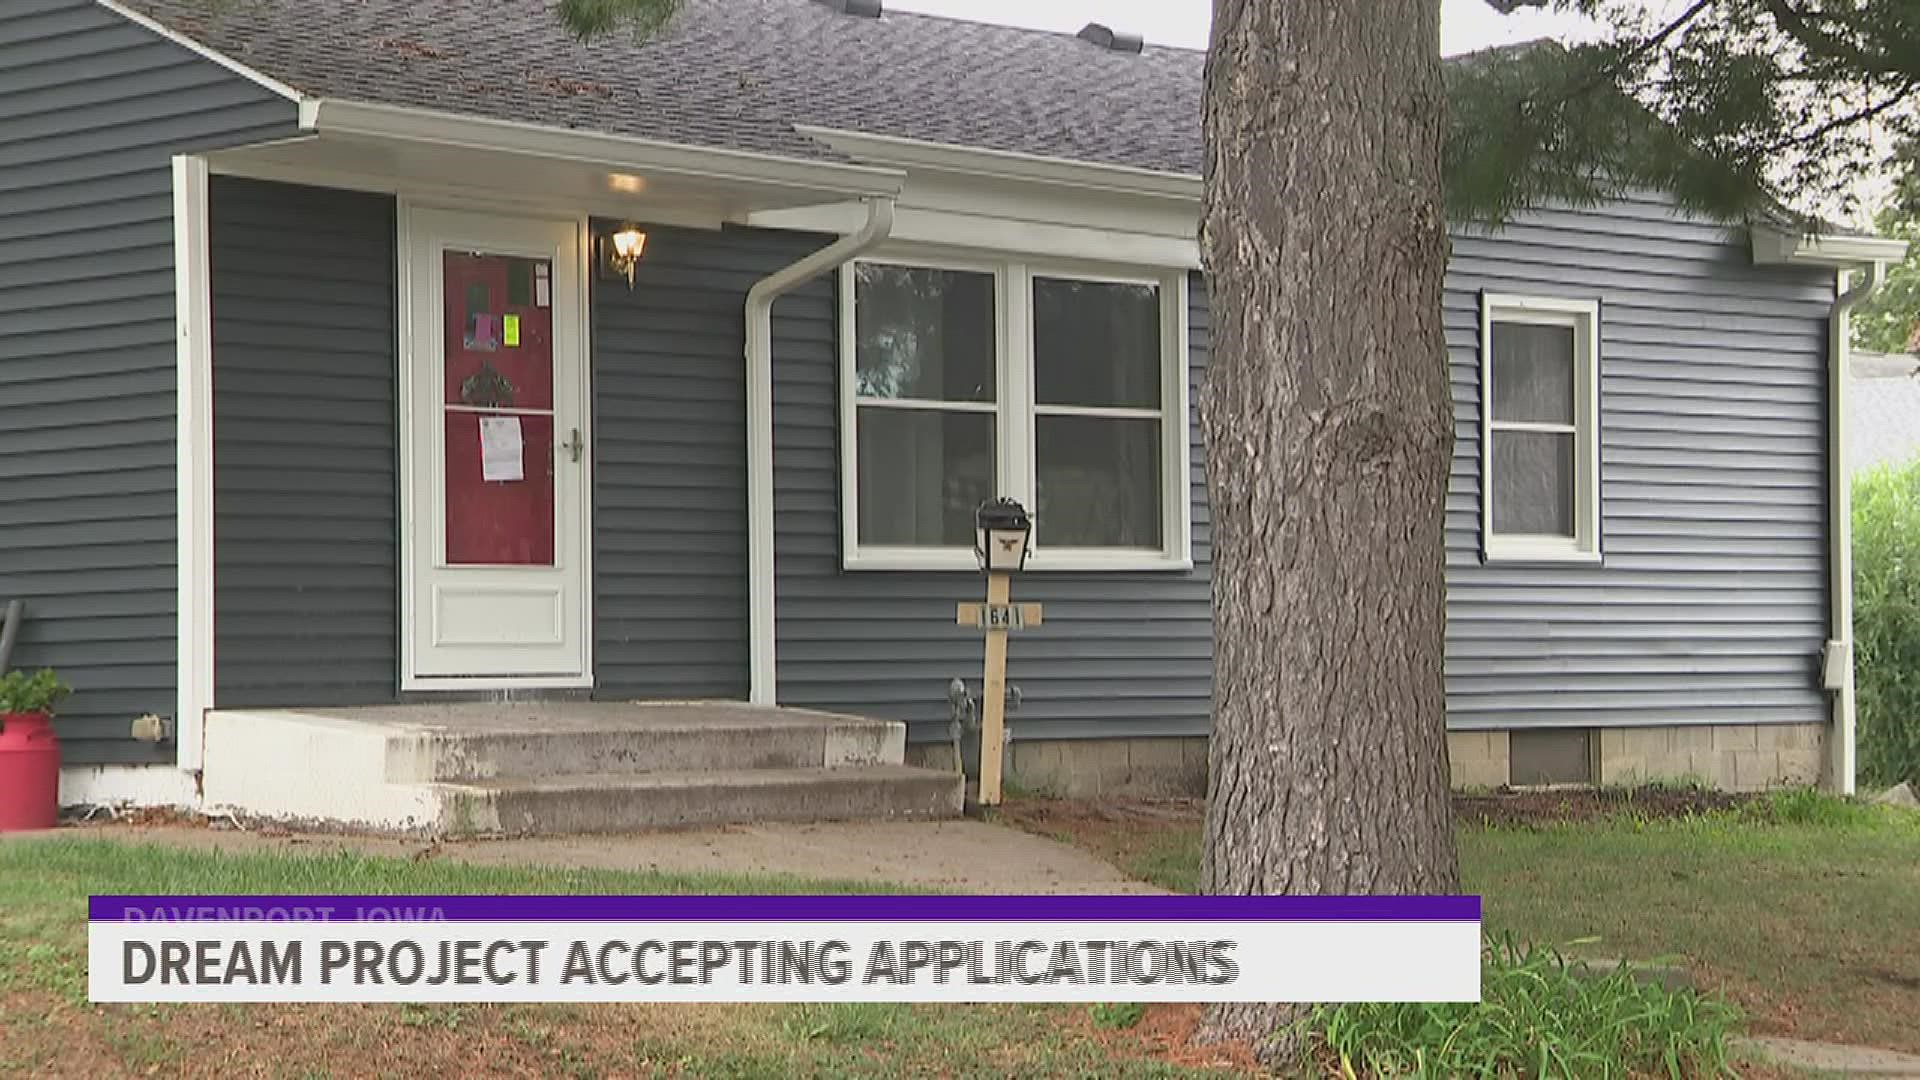 This is the fourth time that the City of Davenport has opened up funding for the popular Davenport DREAM project, which helps certain homeowners revitalize property.